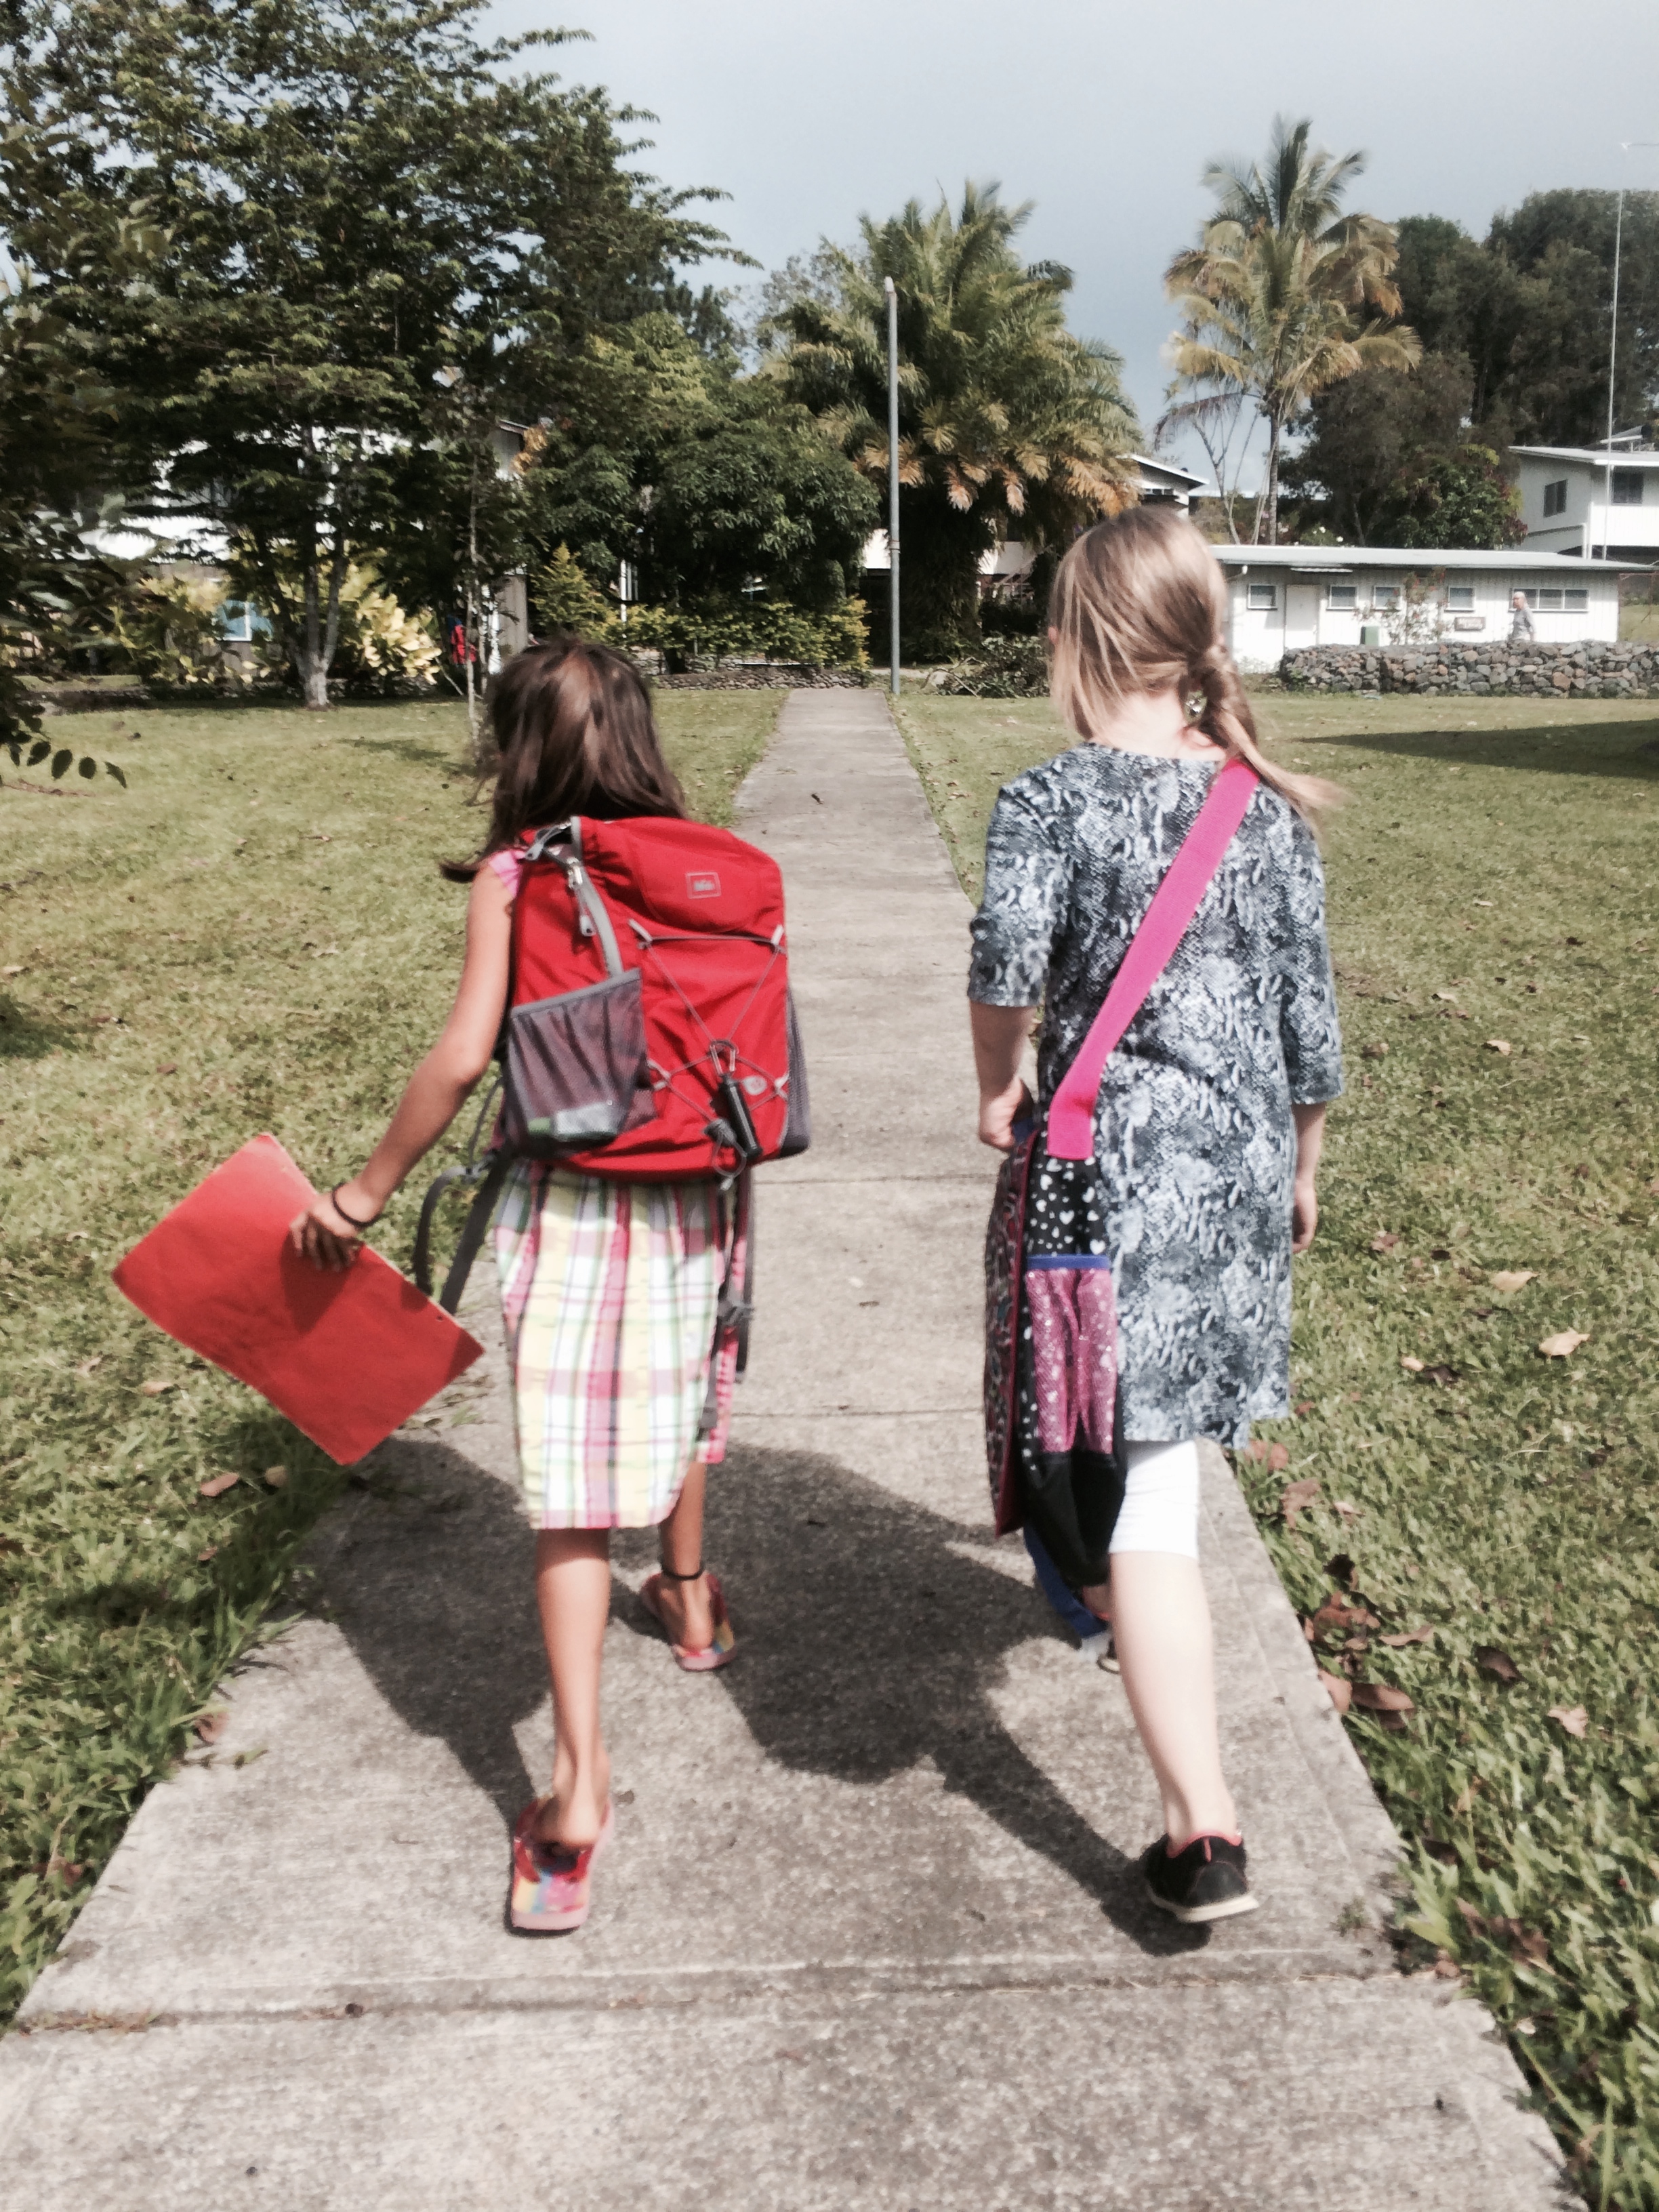 Walking home from school with one of her new friends/classmates (Small world - we know this little girl's grandparents in the midwest!)